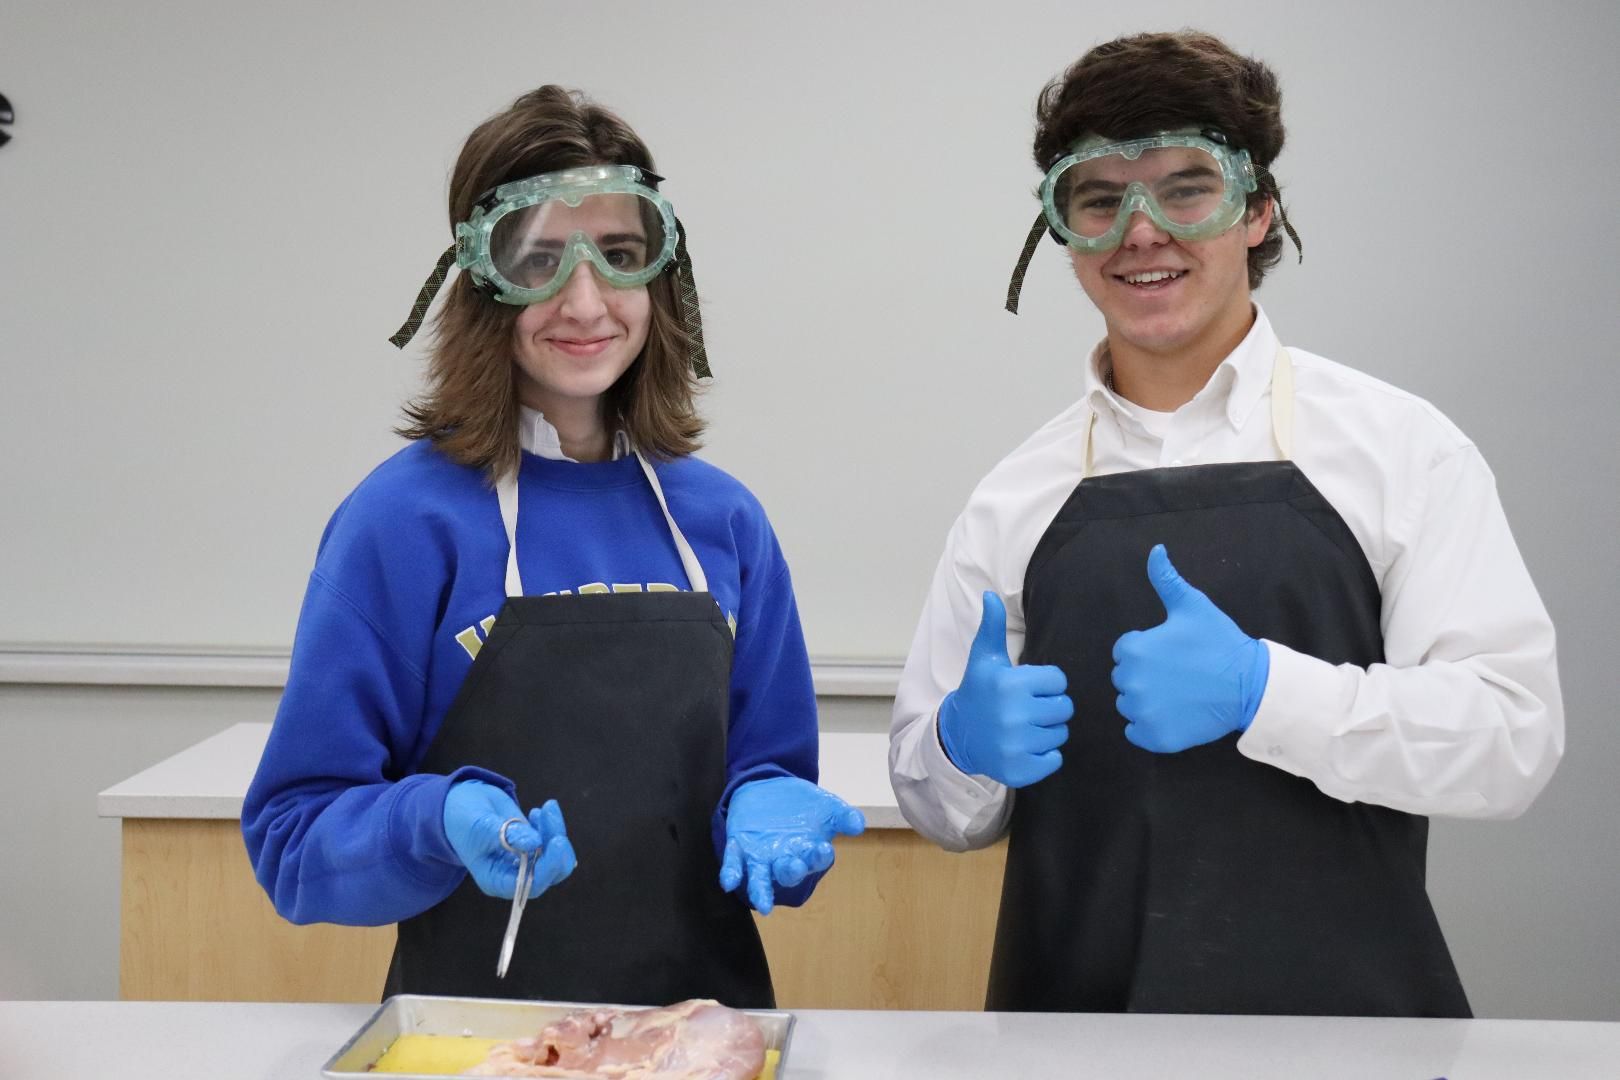 A boy and a girl wearing aprons and goggles are giving a thumbs up